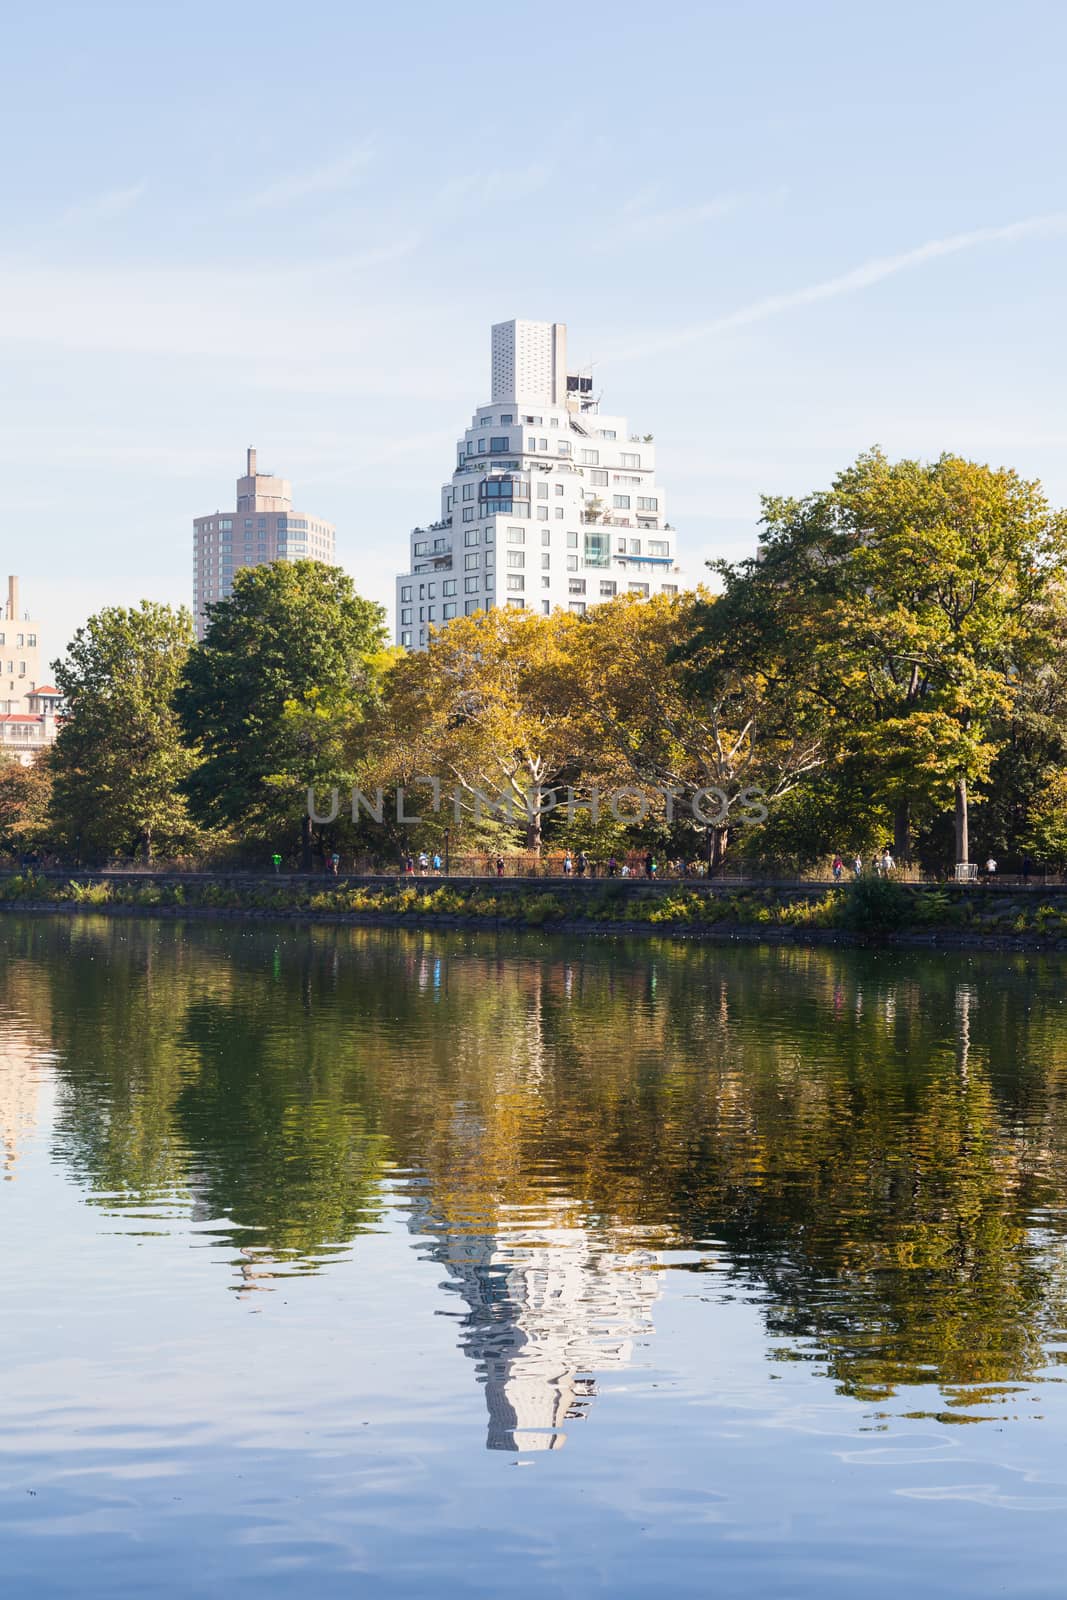 The view across the Jackie Onassis Reservoir in Central Park, New York City on a still autumn morning.